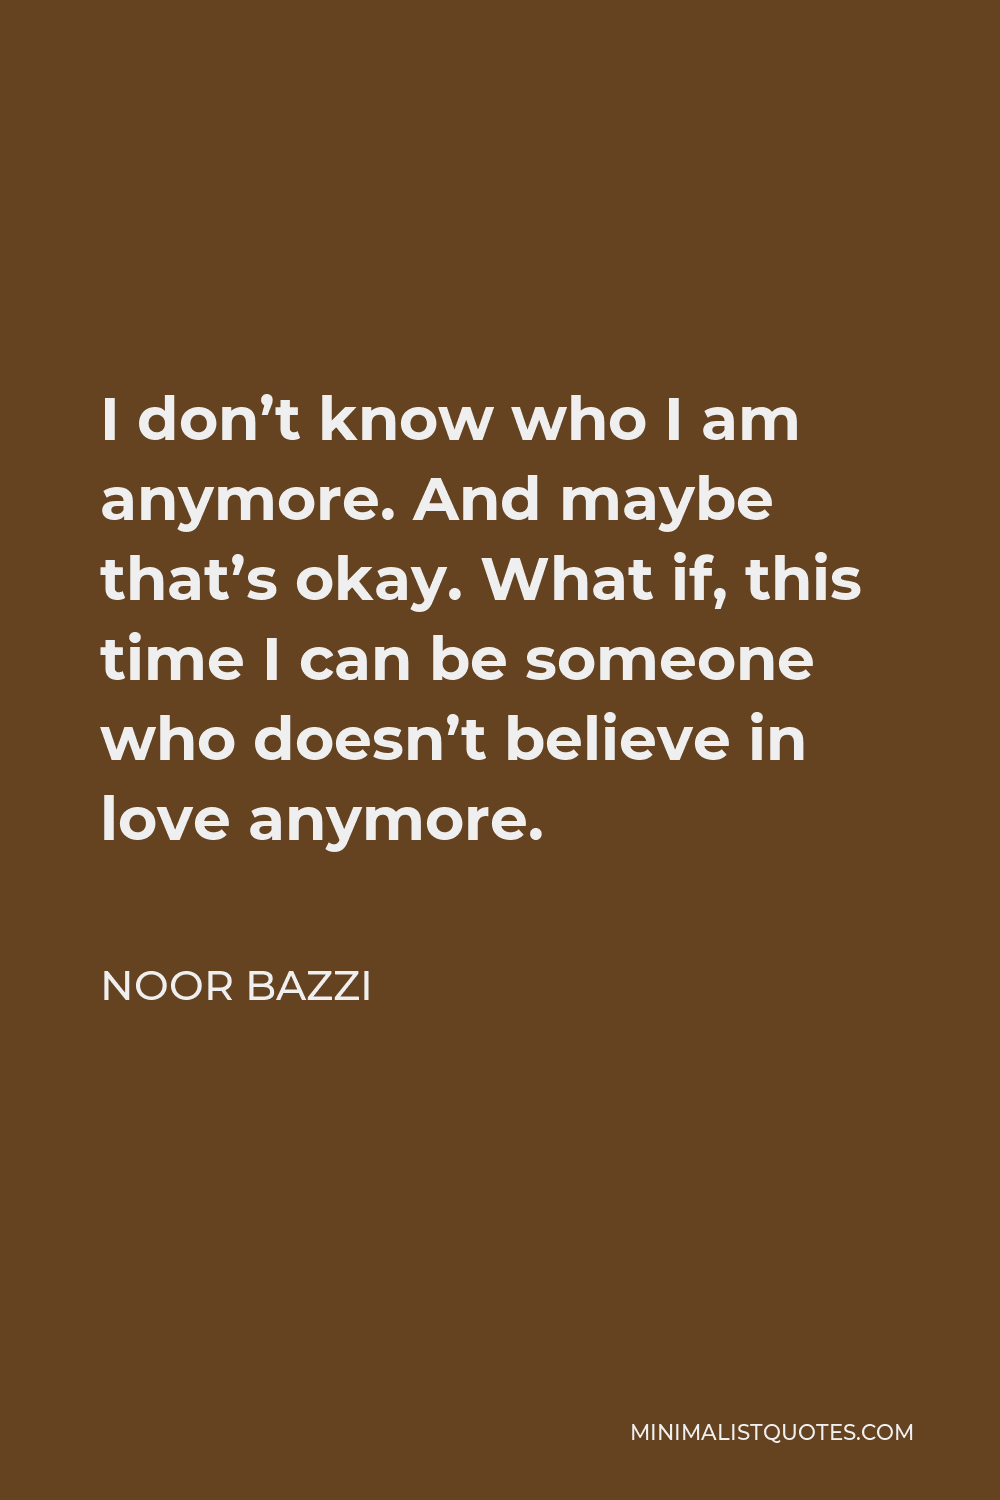 Noor Bazzi Quote - I don’t know who I am anymore. And maybe that’s okay. What if, this time I can be someone who doesn’t believe in love anymore.